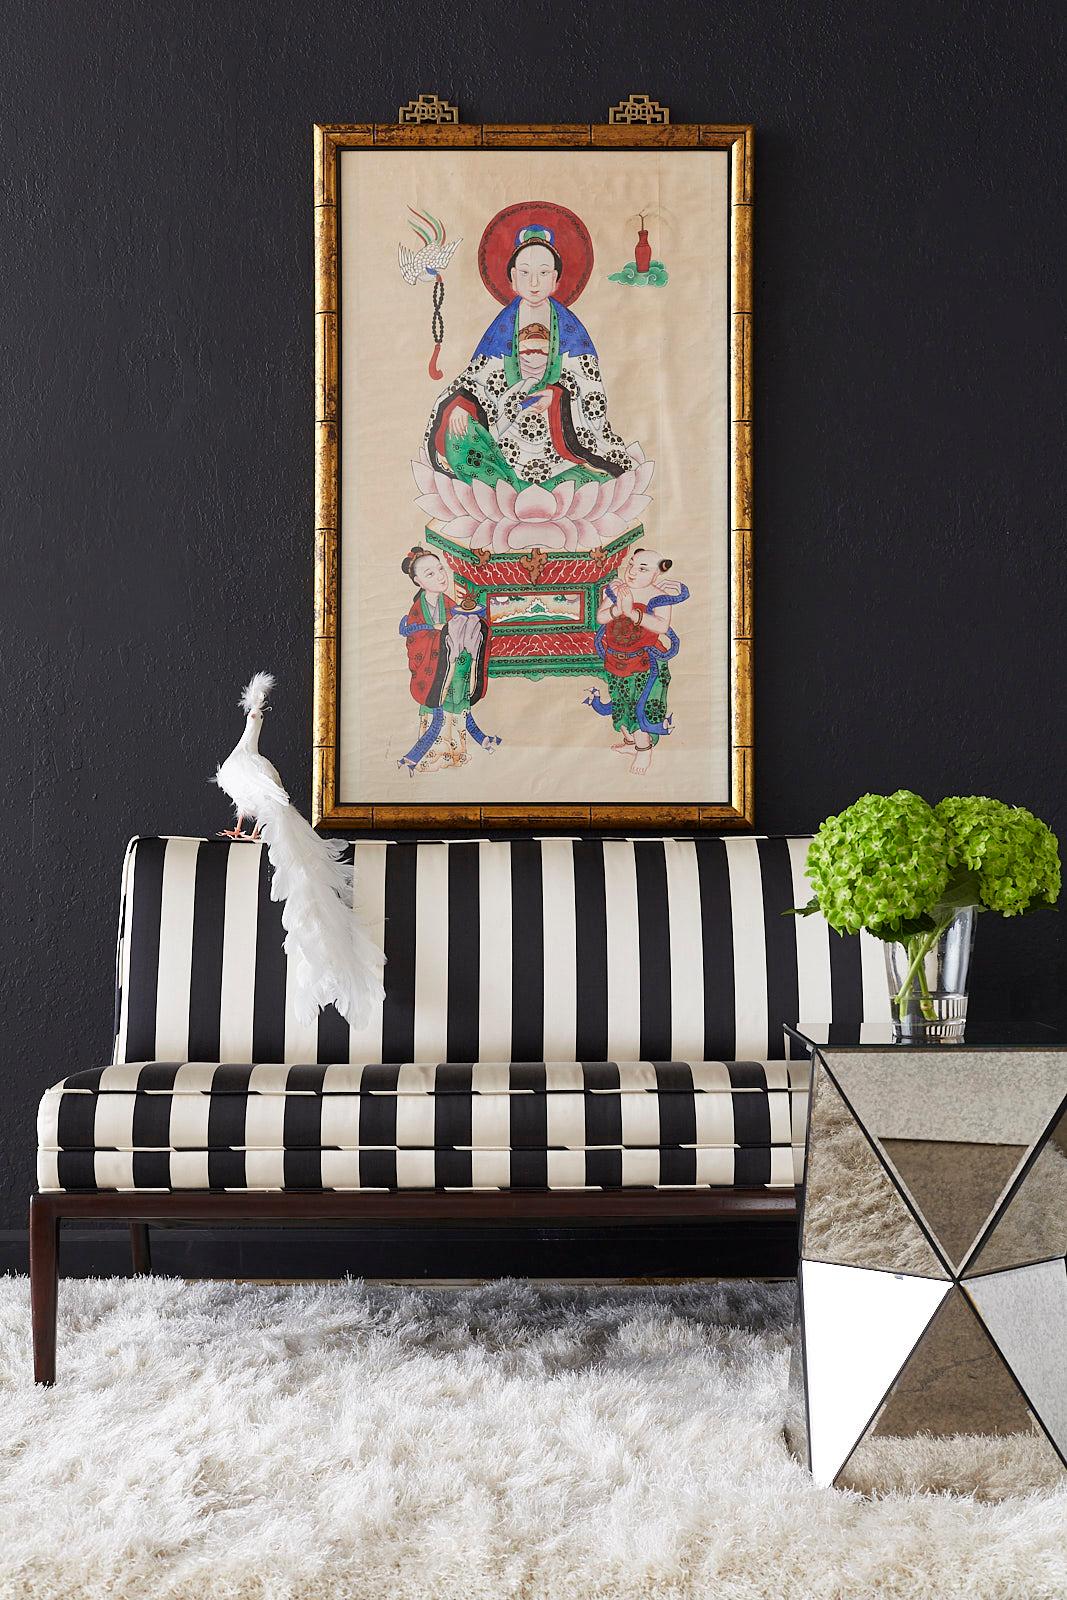 Colorful Chinese Buddhist Bodhisattva painting of Guanyin depicted sitting on a lotus blossom with two attendants. Ink and color pigments on paper set in a faux bamboo giltwood frame. The frame has a lovely distressed finish topped with brass